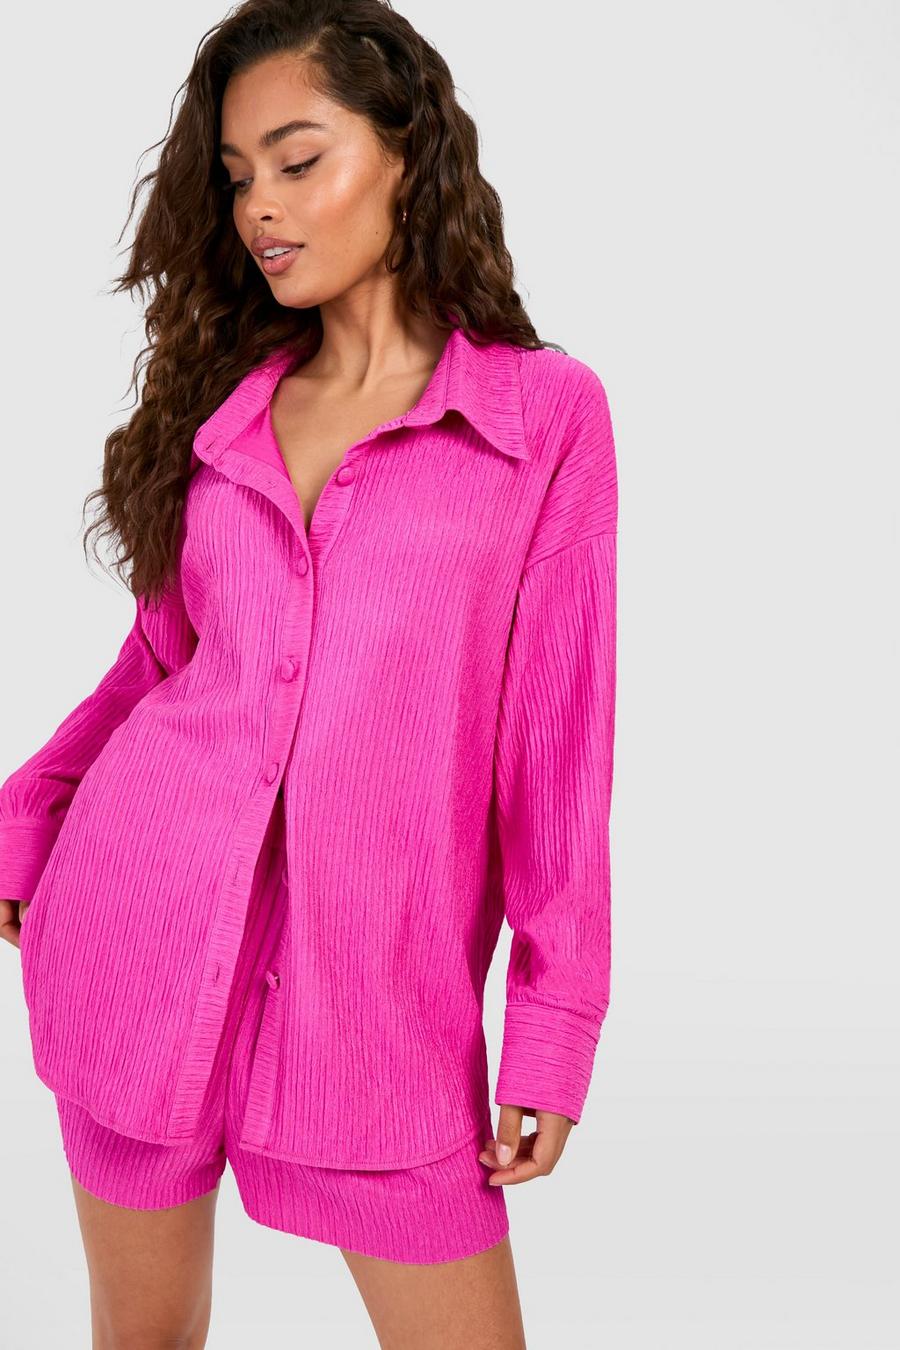 Bright pink Premium Crinkle Relaxed Fit Shirt